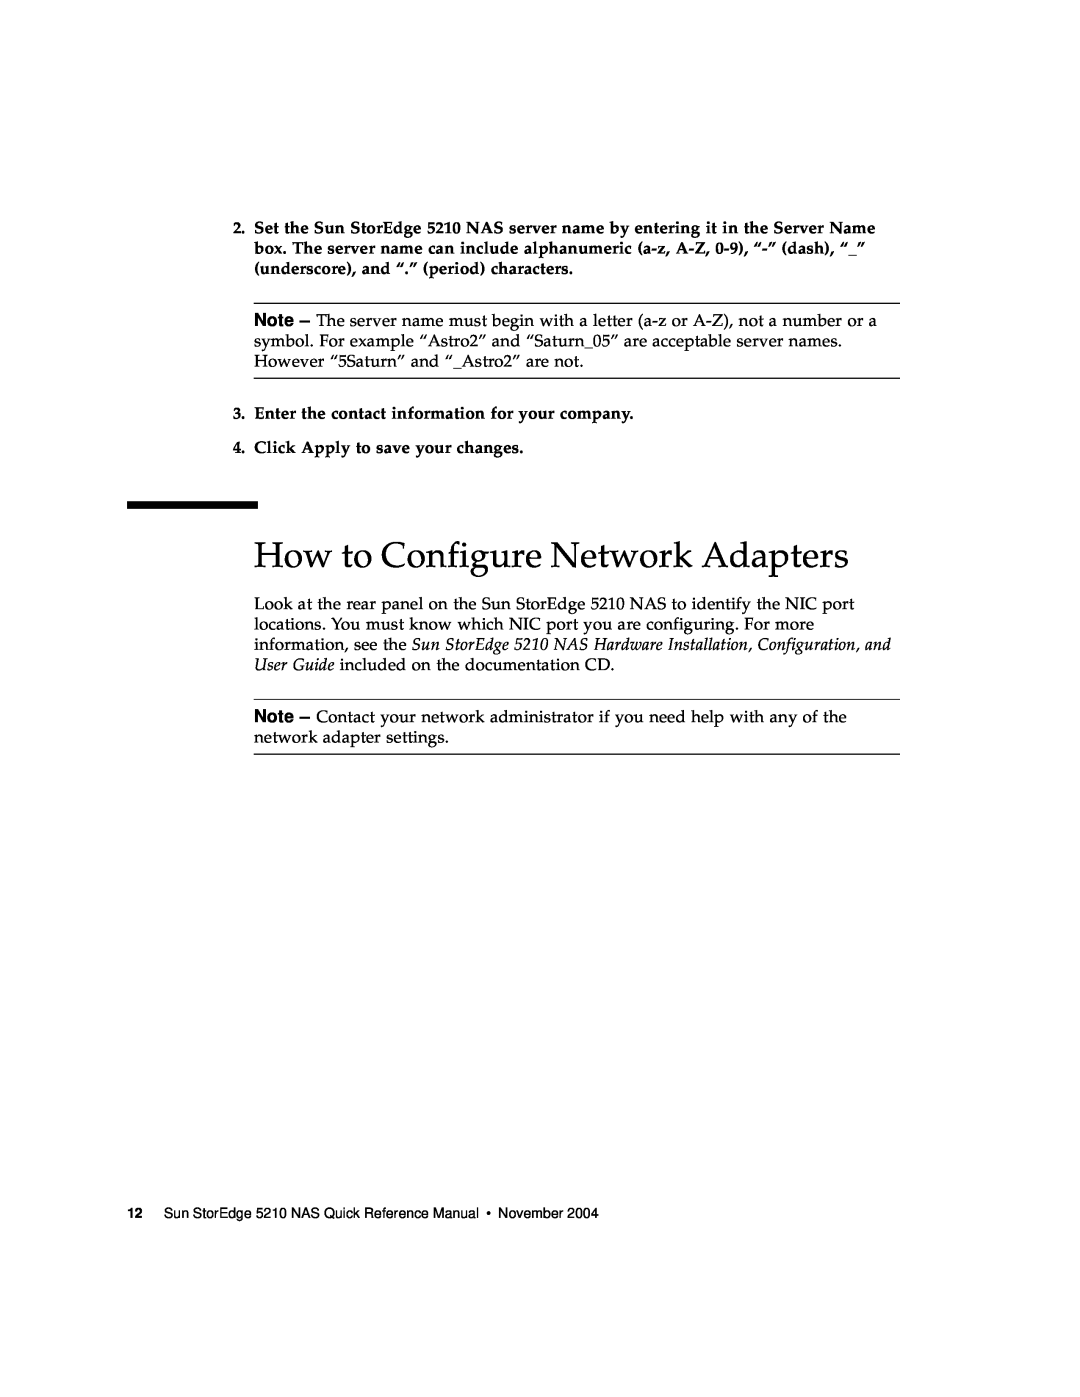 Sun Microsystems 5210 NAS manual How to Configure Network Adapters, Enter the contact information for your company 